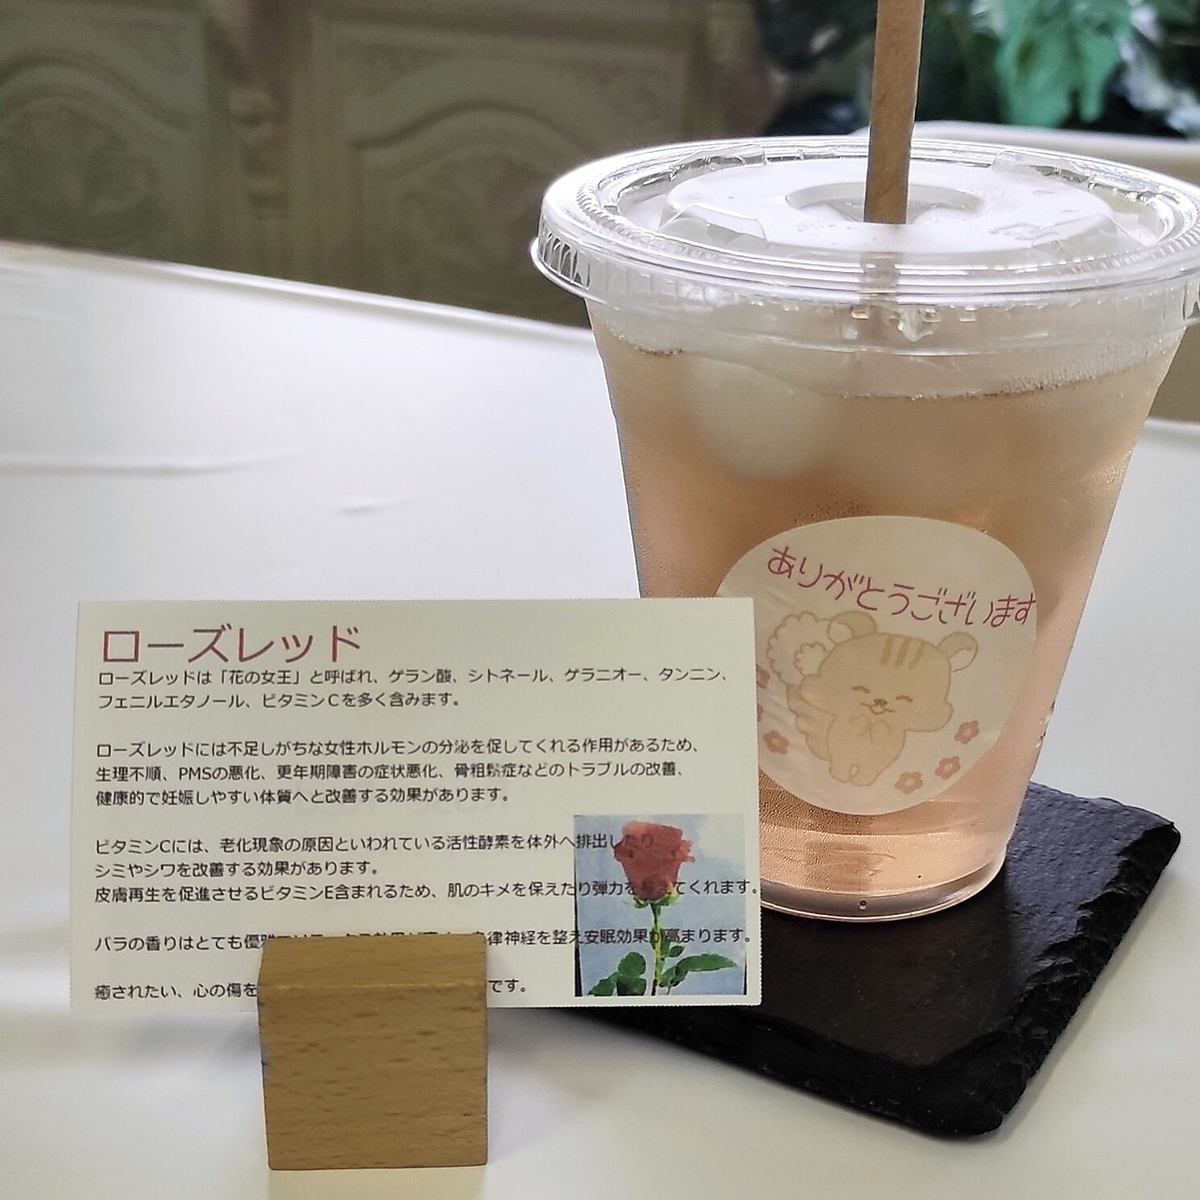 Herbal tea is sold with a cute interior! Recommended for beauty and health